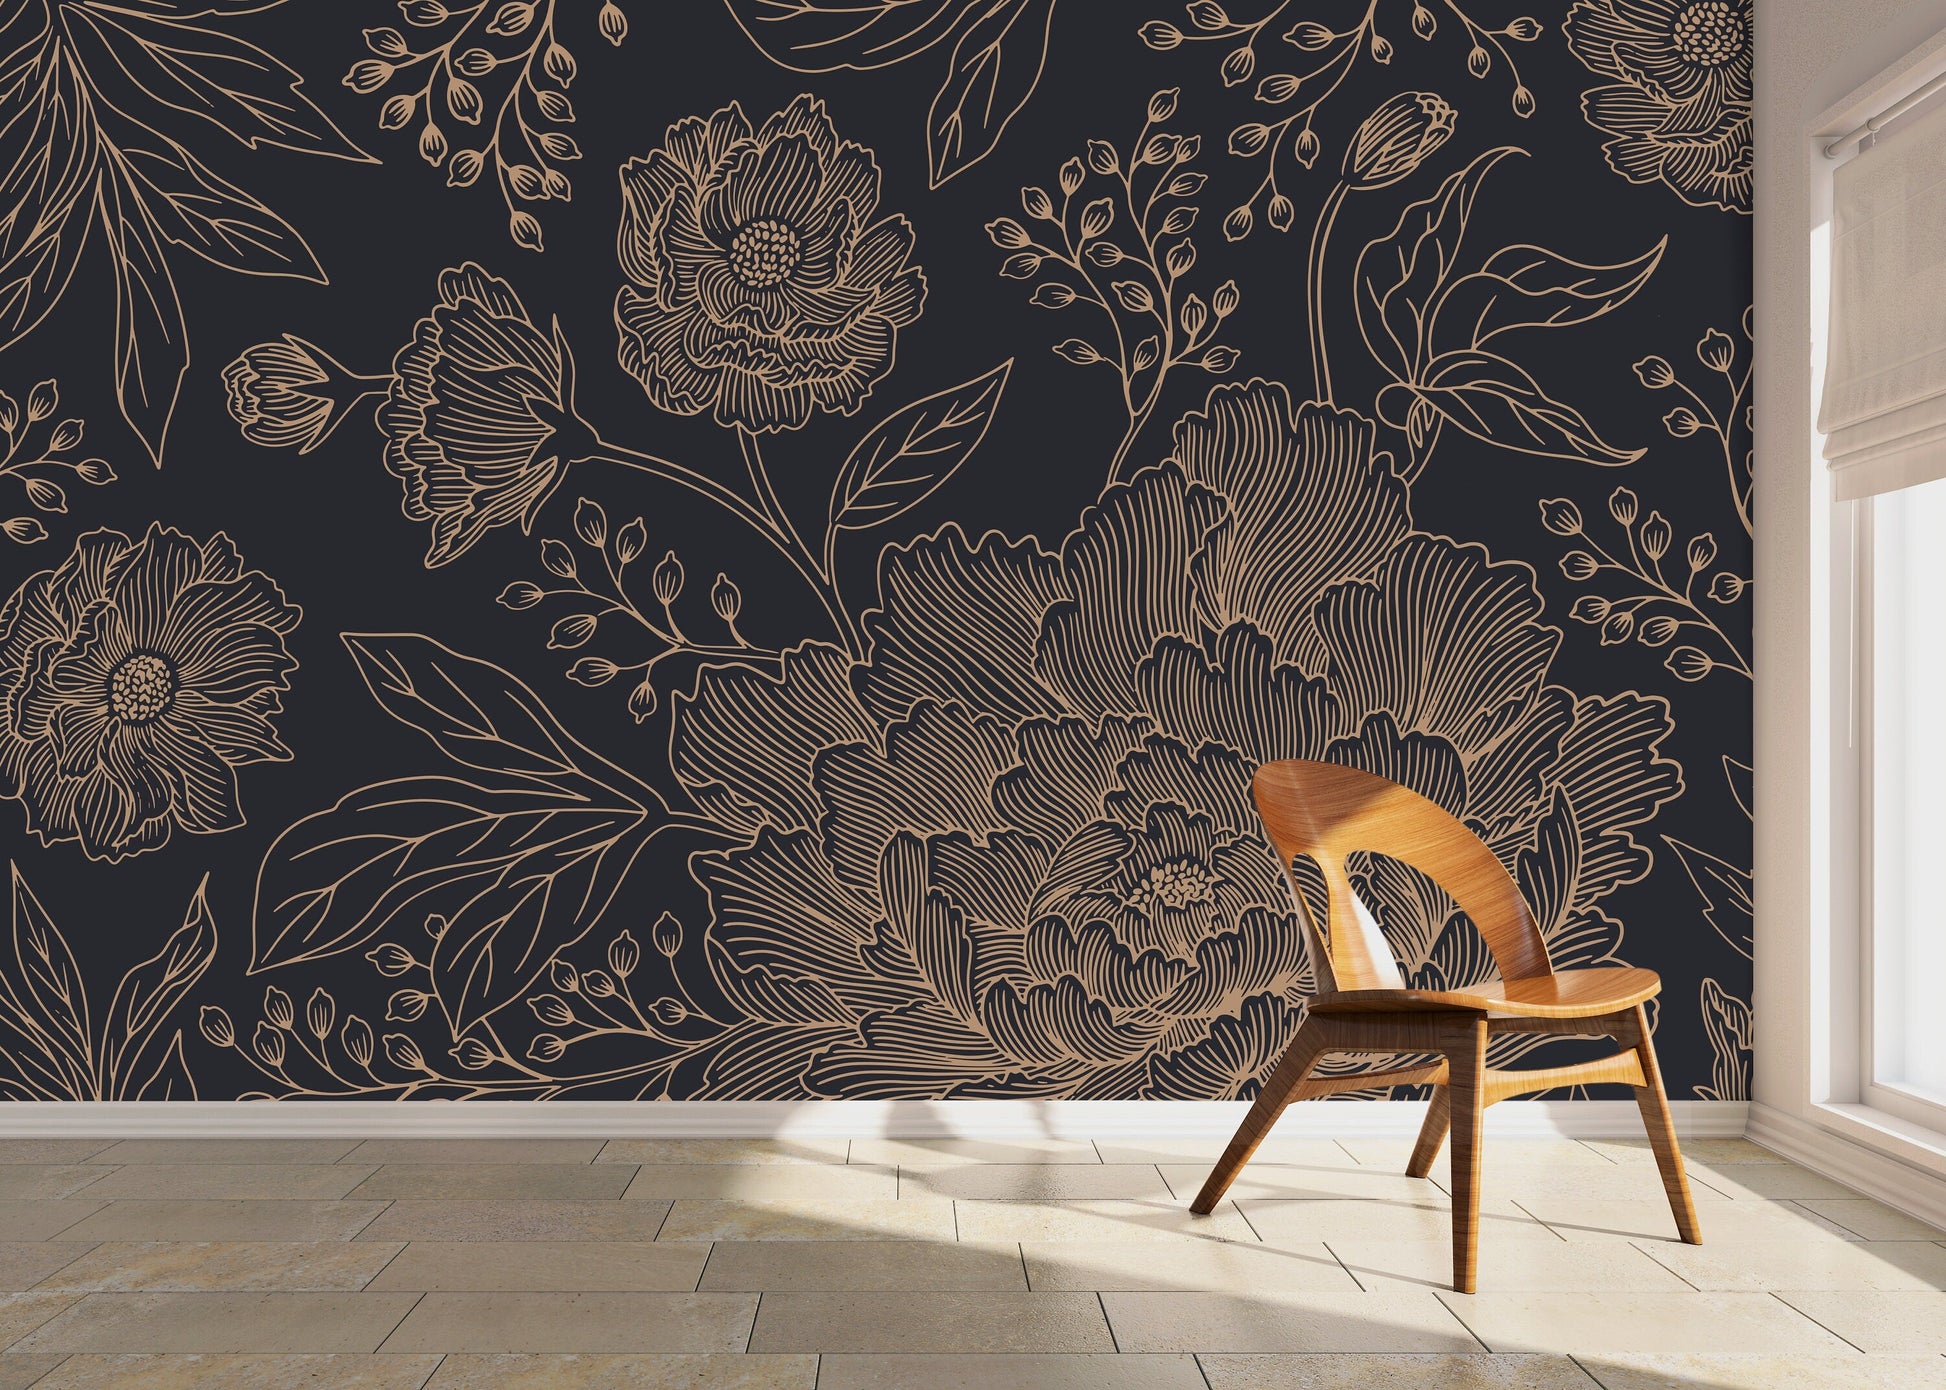 Black and Gold Large Floral Wallpaper / Peel and Stick Wallpaper Removable Wallpaper Home Decor Wall Art Wall Decor Room Decor - C925